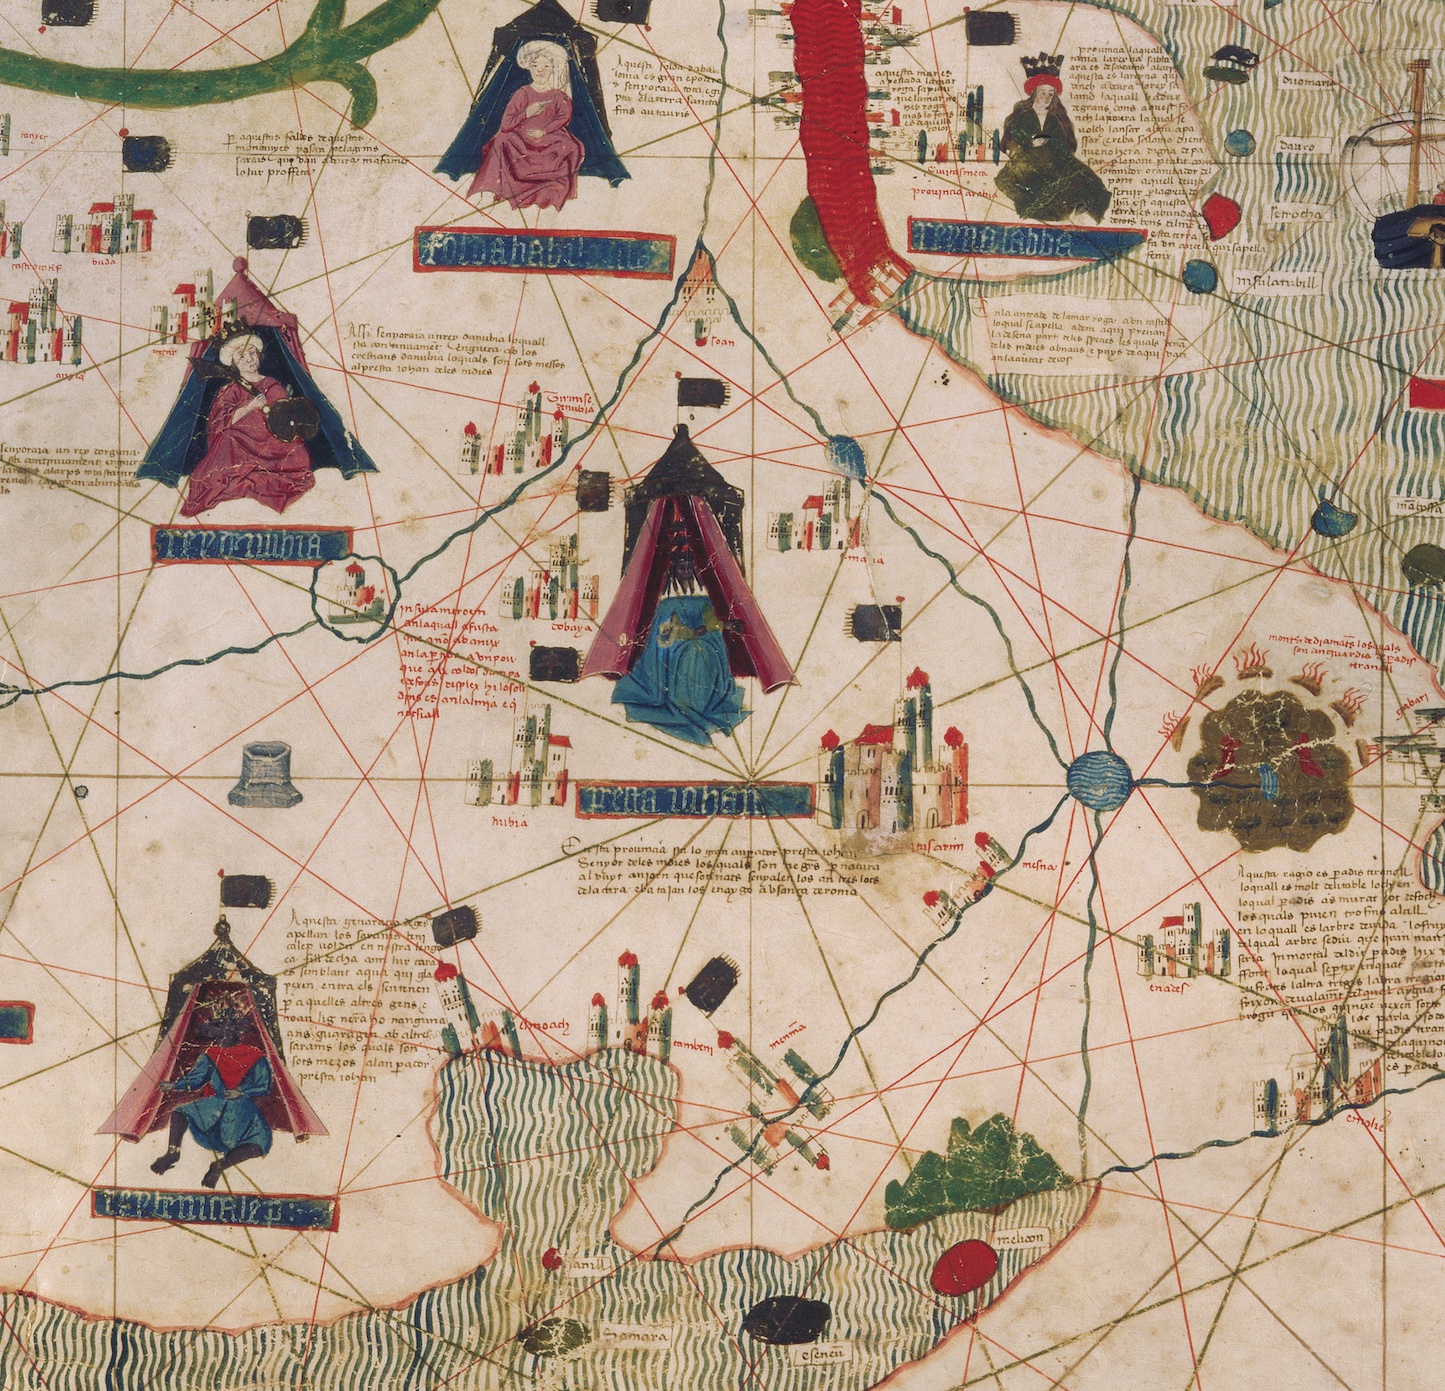 Inset image of globe with Prester John in the center sitting in front of a tent.